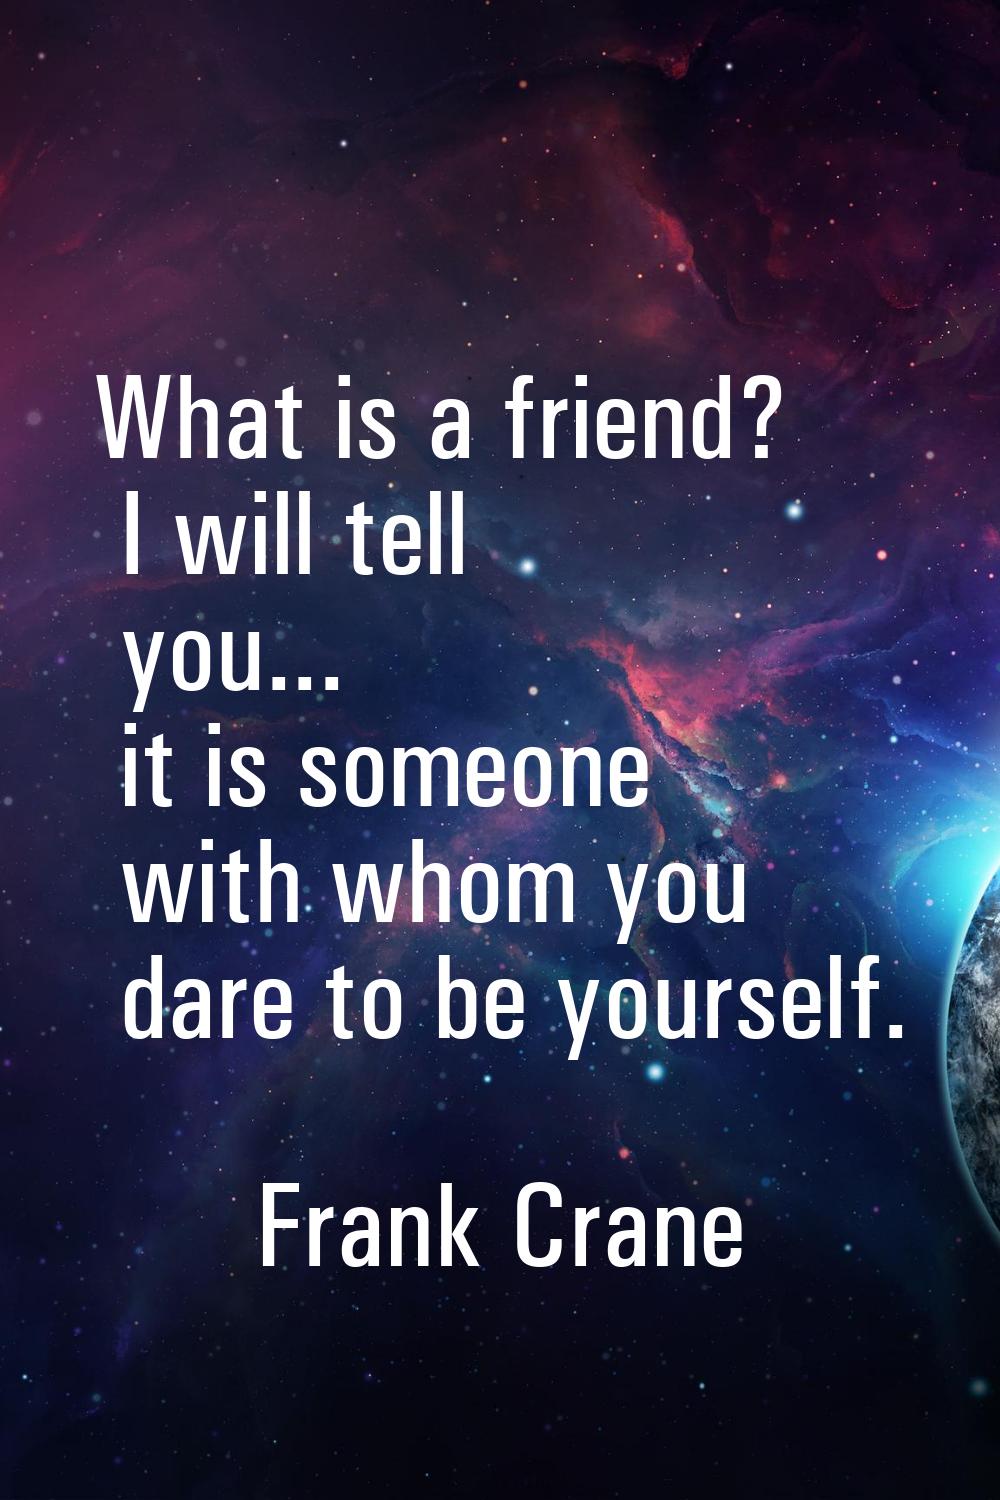 What is a friend? I will tell you... it is someone with whom you dare to be yourself.